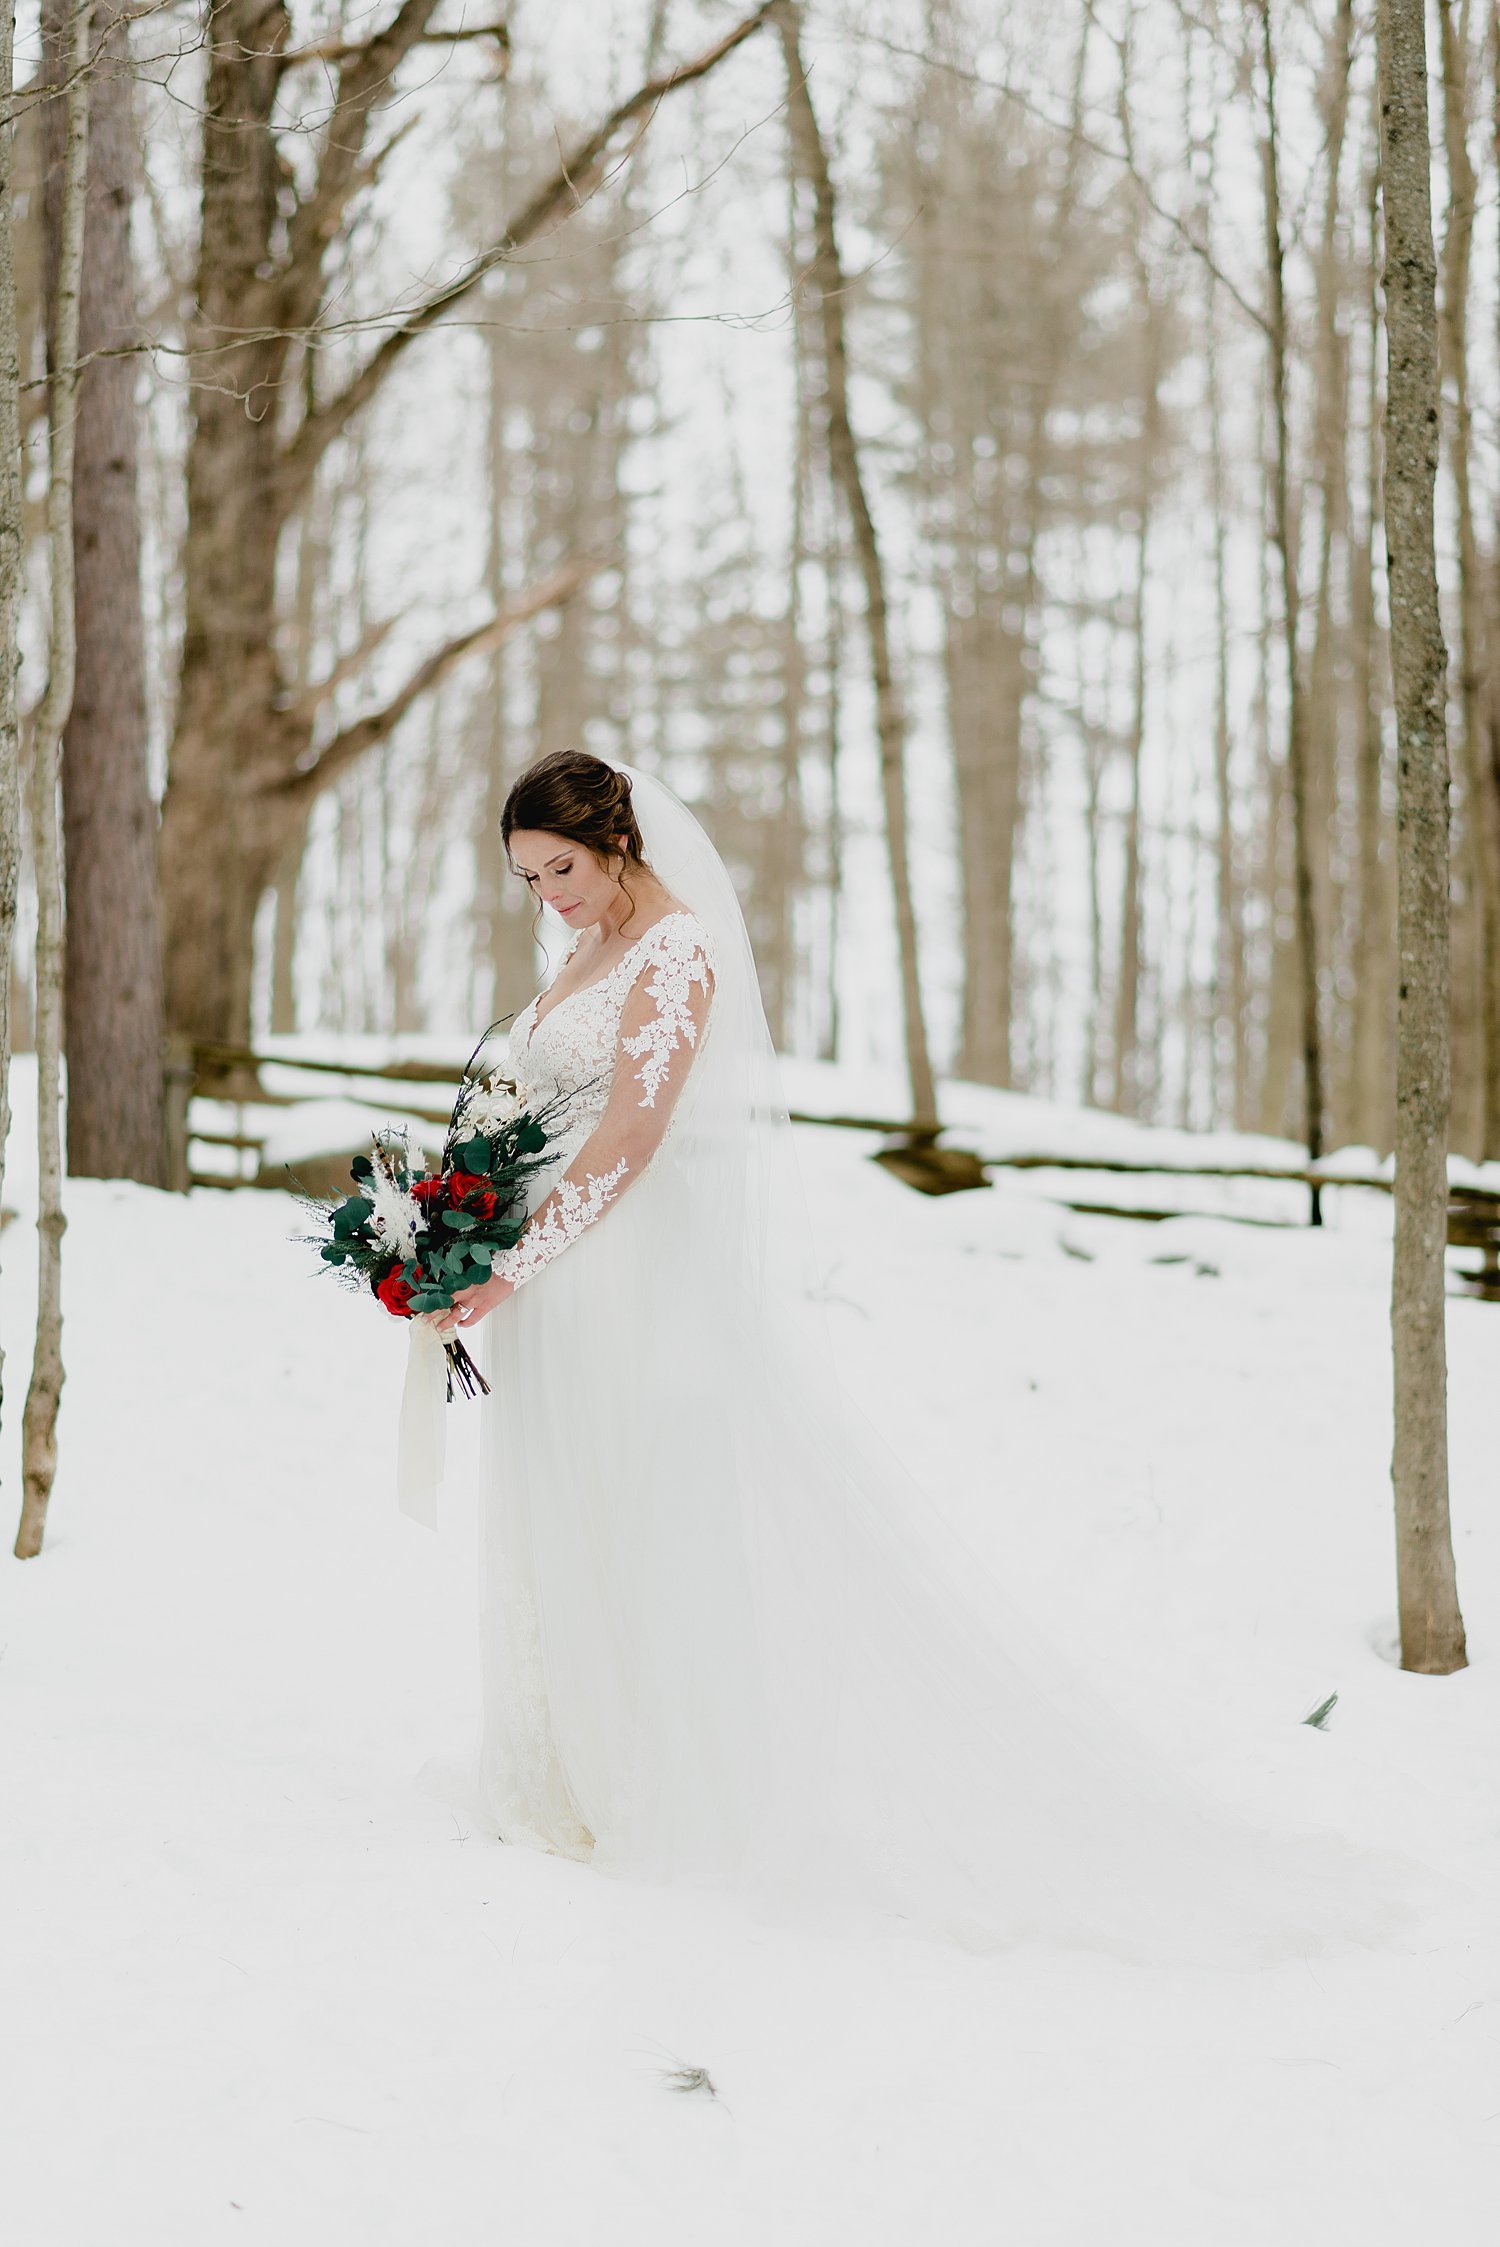 Intimate Winter Elopement at O'Hara Mill Homestead in Madoc, Ontario | Prince Edward County Wedding Photographer | Holly McMurter Photographs_0037.jpg